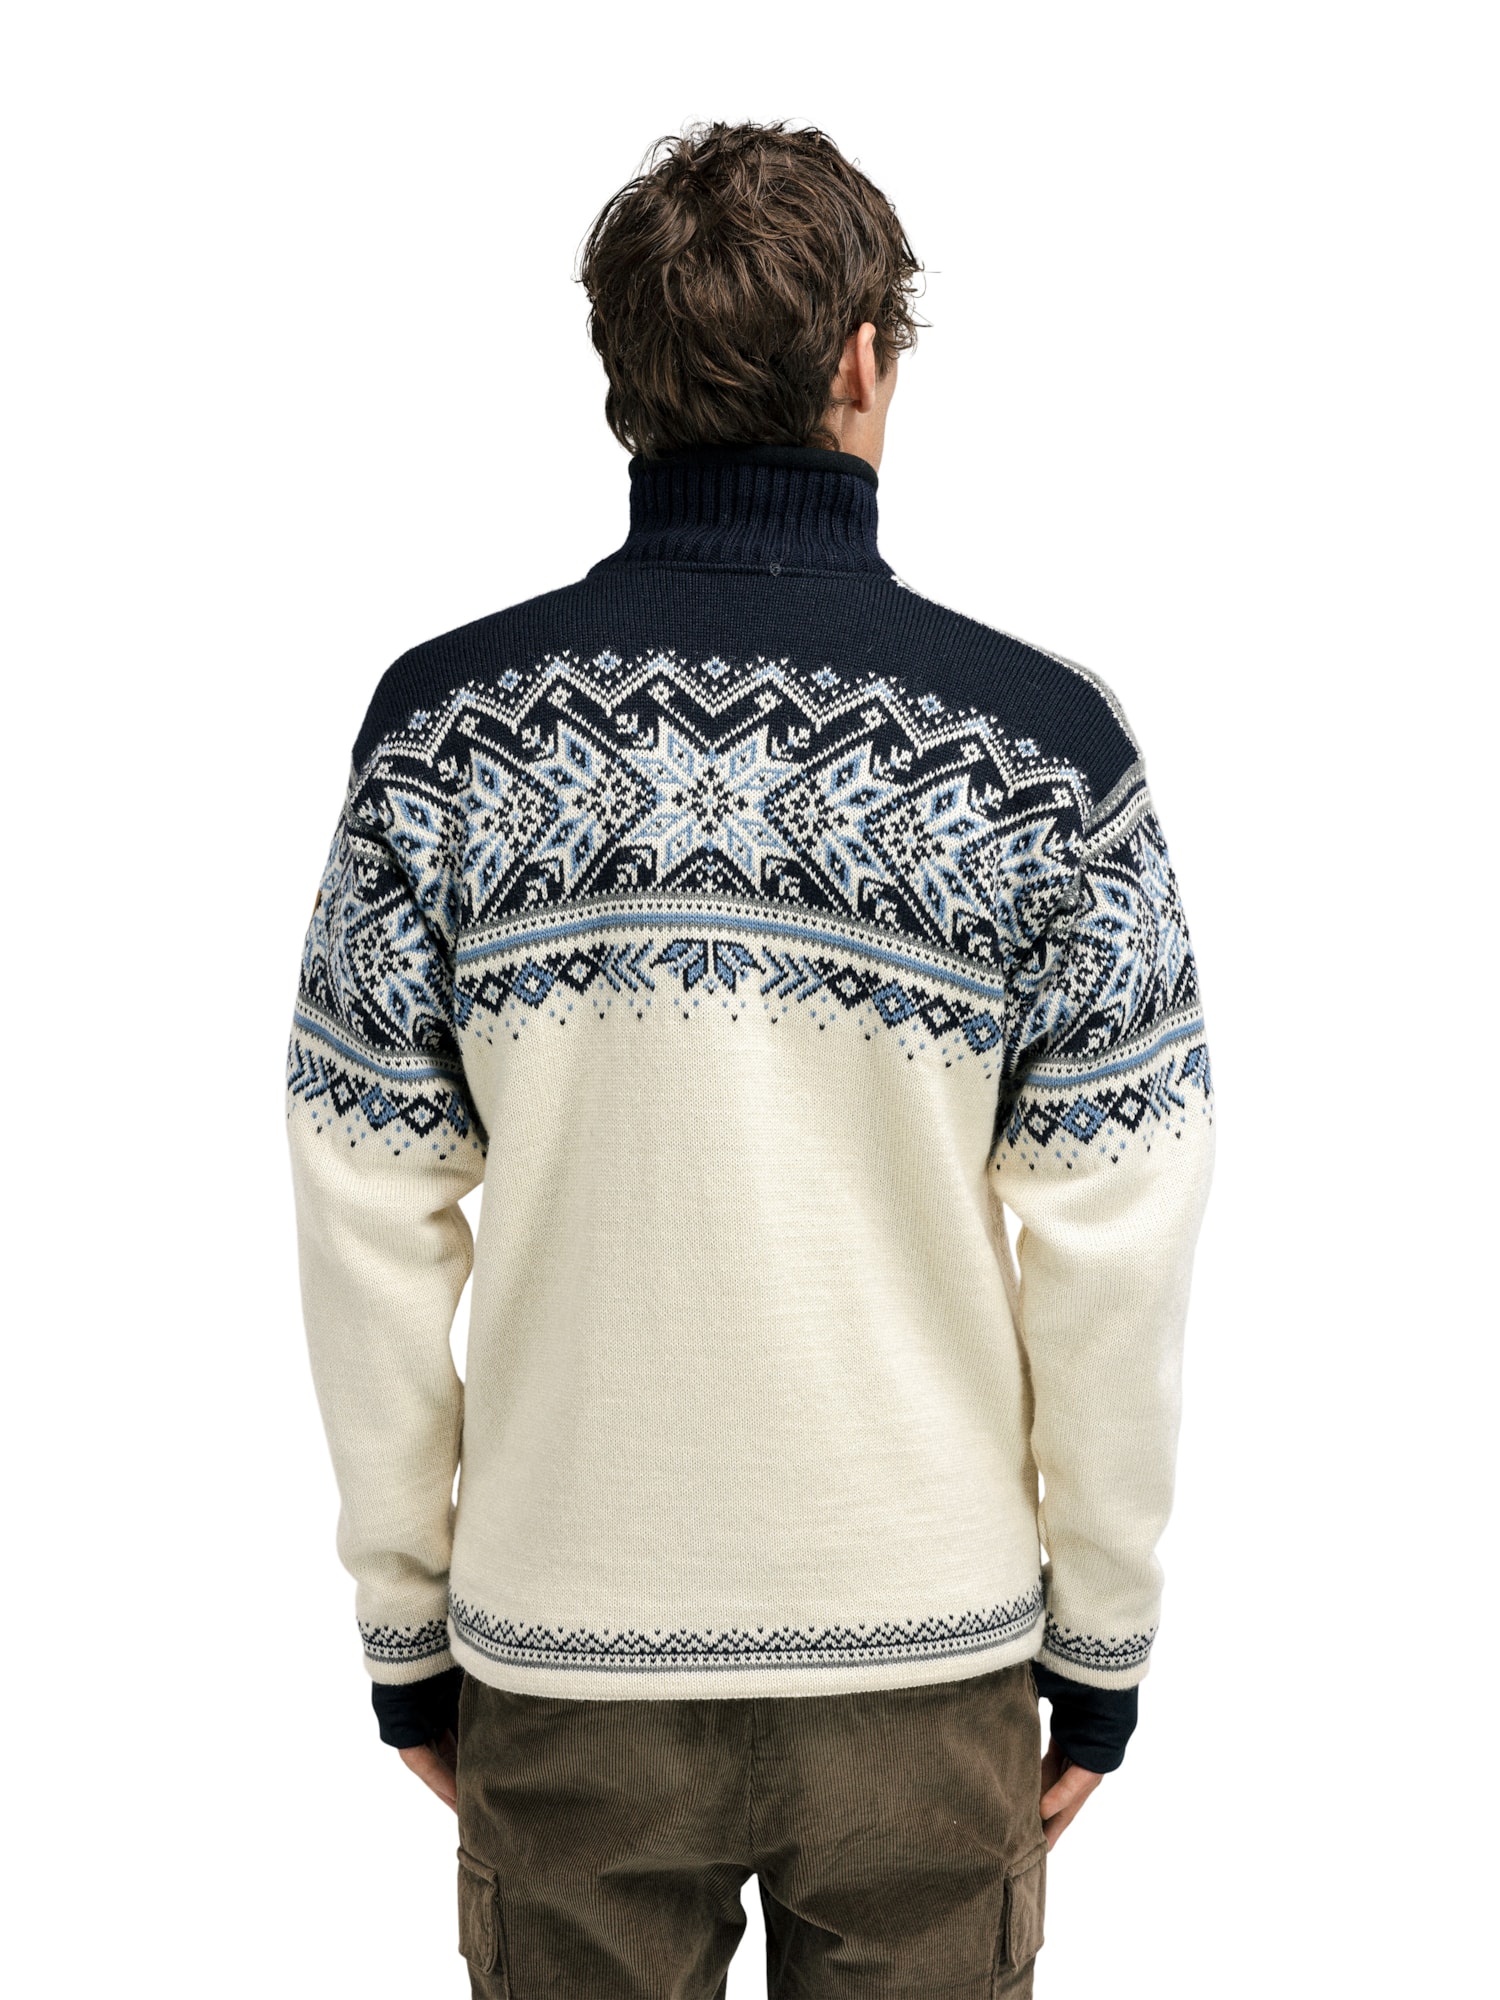 Vail Weatherproof Sweater Norway Offwhite - - Dale - of of Norway - Dale Men